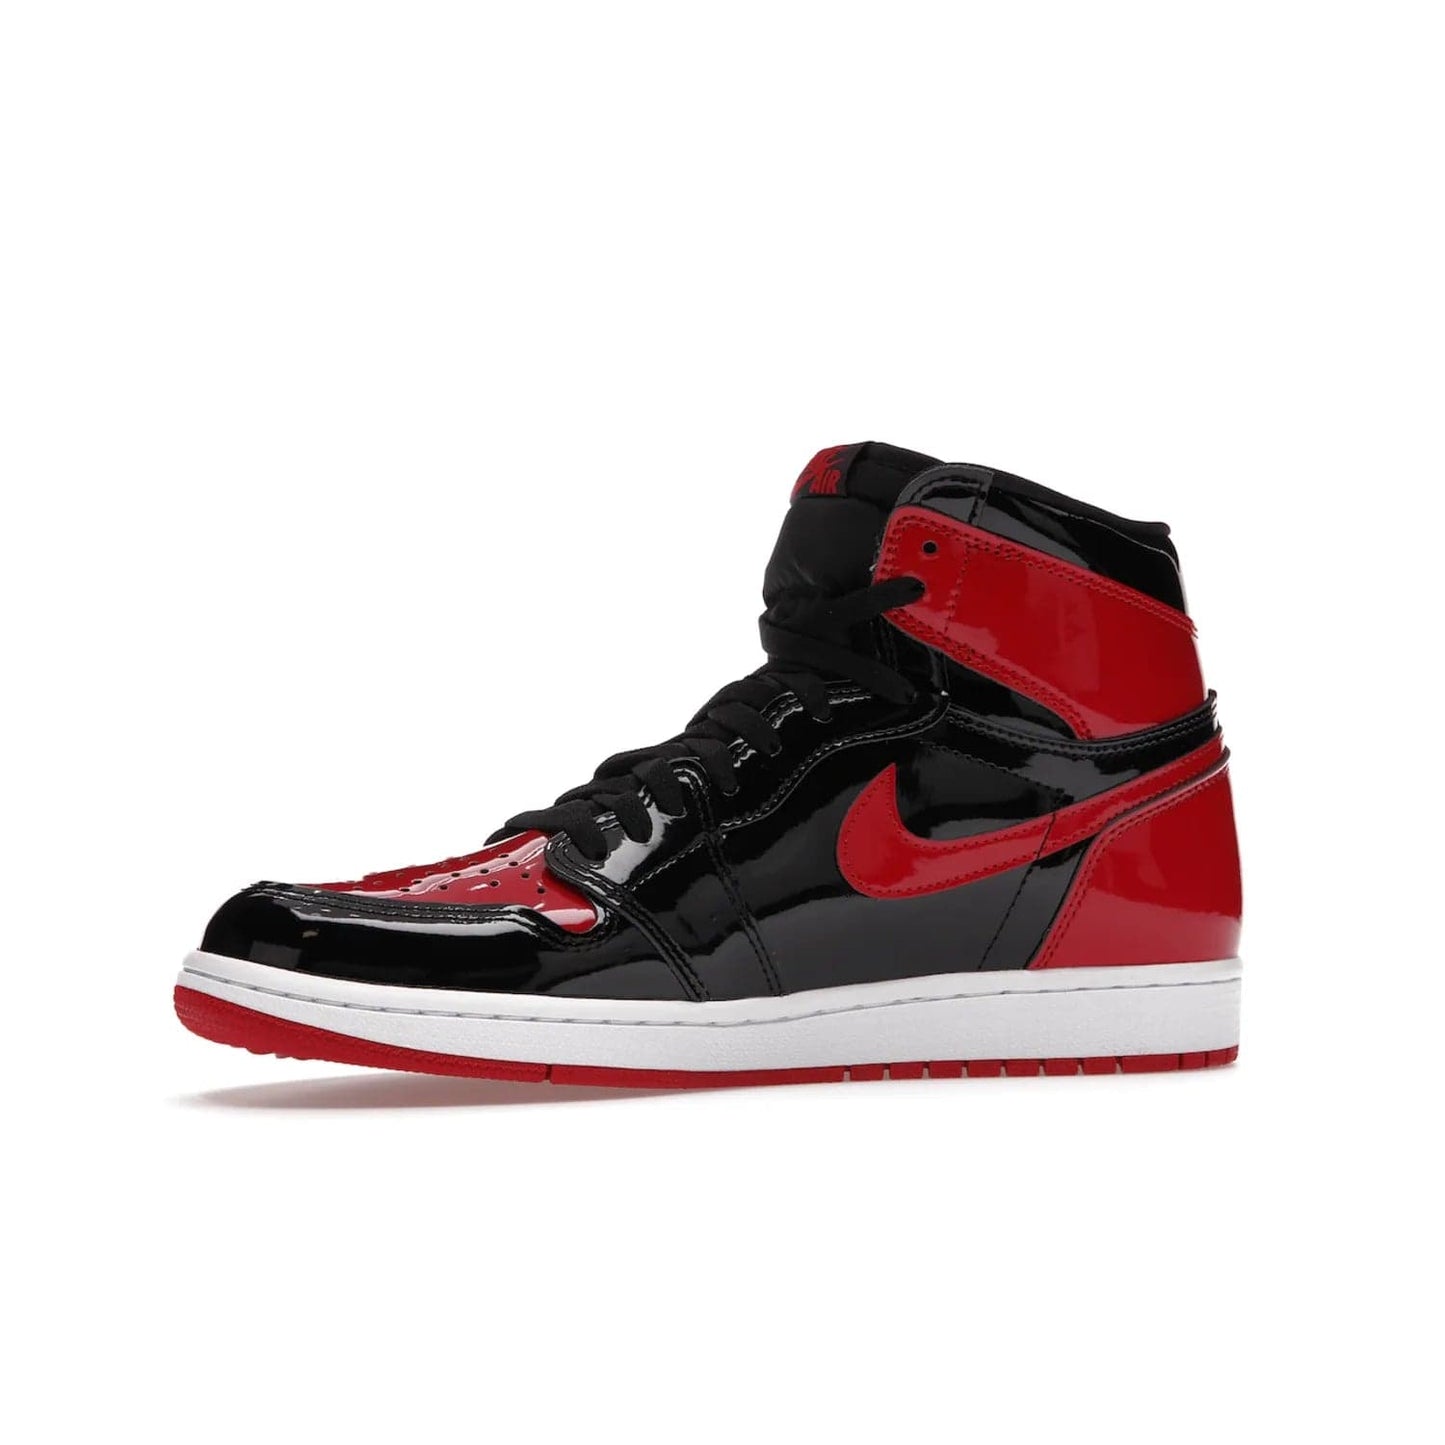 Jordan 1 Retro High OG Patent Bred - Image 17 - Only at www.BallersClubKickz.com - Introducing Air Jordan 1 Retro High OG Patent Bred - sleek patent leather upper, signature weaved Nike Air tongue and classic Wings logo on collar. Red and white sole complete signature look. Releasing December 2021 - perfect retro edition for holidays.